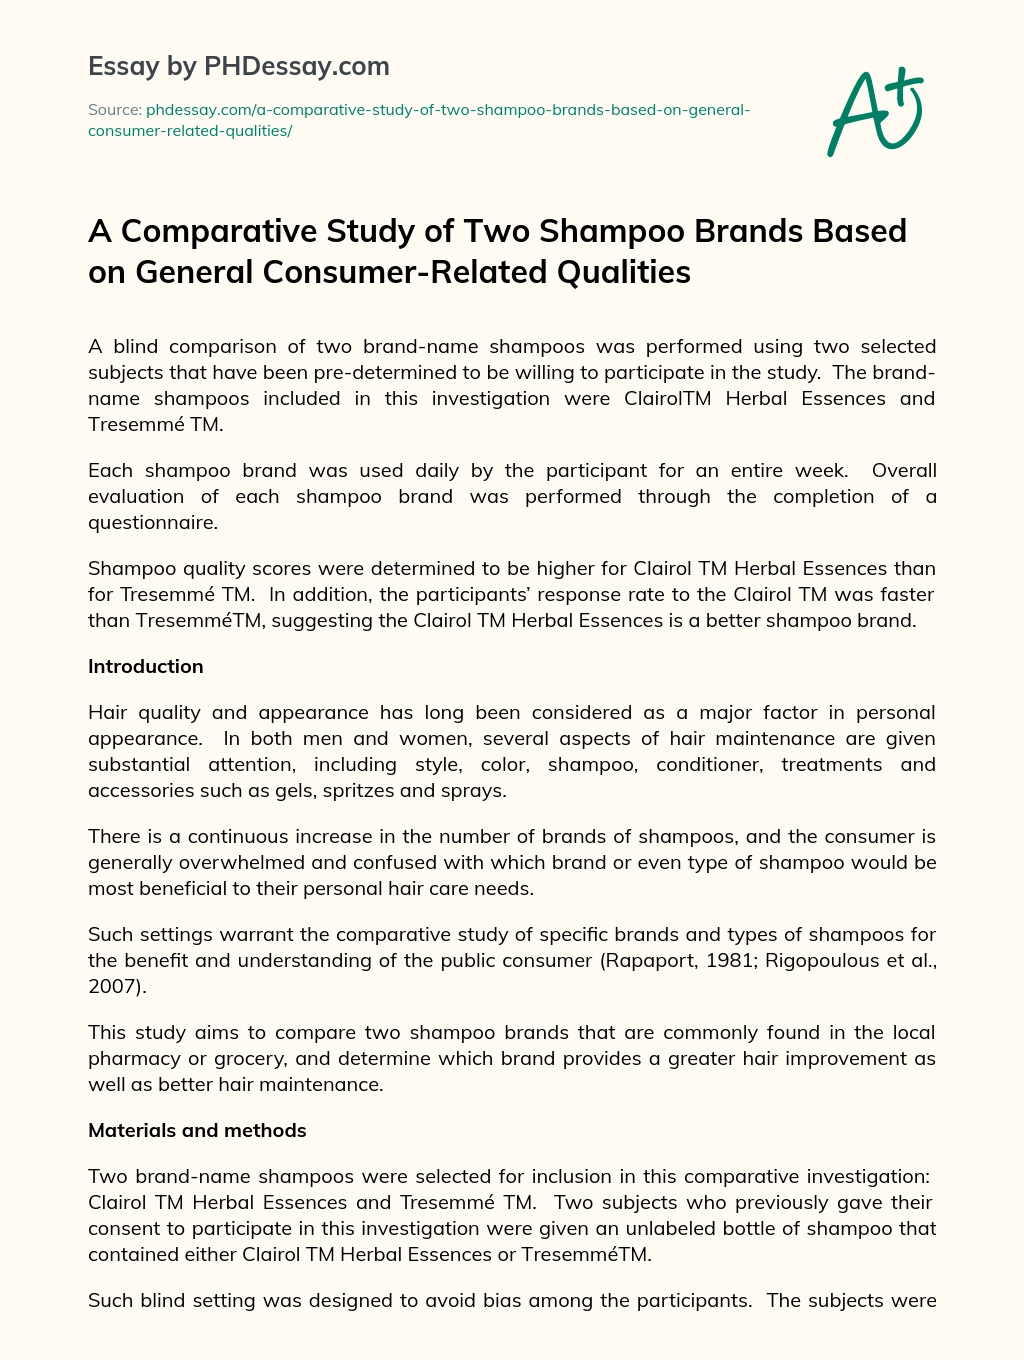 A Comparative Study of Two Shampoo Brands Based on  General Consumer-Related Qualities essay